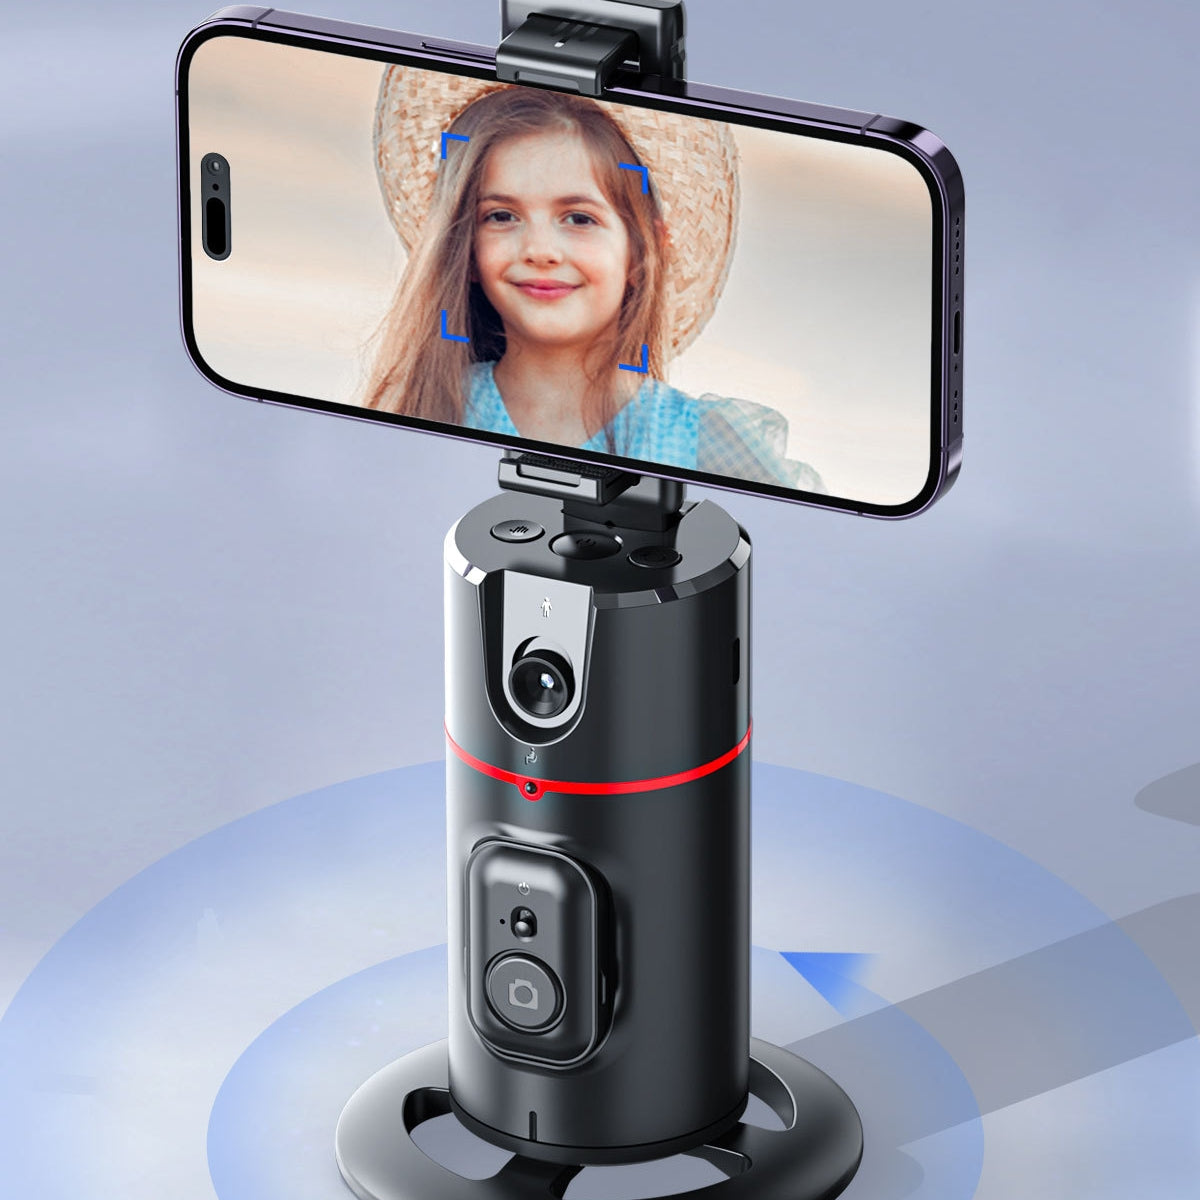 Capture flawless photos and videos with our AI-driven face tracking smartphone camera base. Effortlessly attaches to your device for precise subject framing and focus. Elevate your photography and video calls with ease. Upgrade your smartphone camera capabilities with this smart AI accessory.